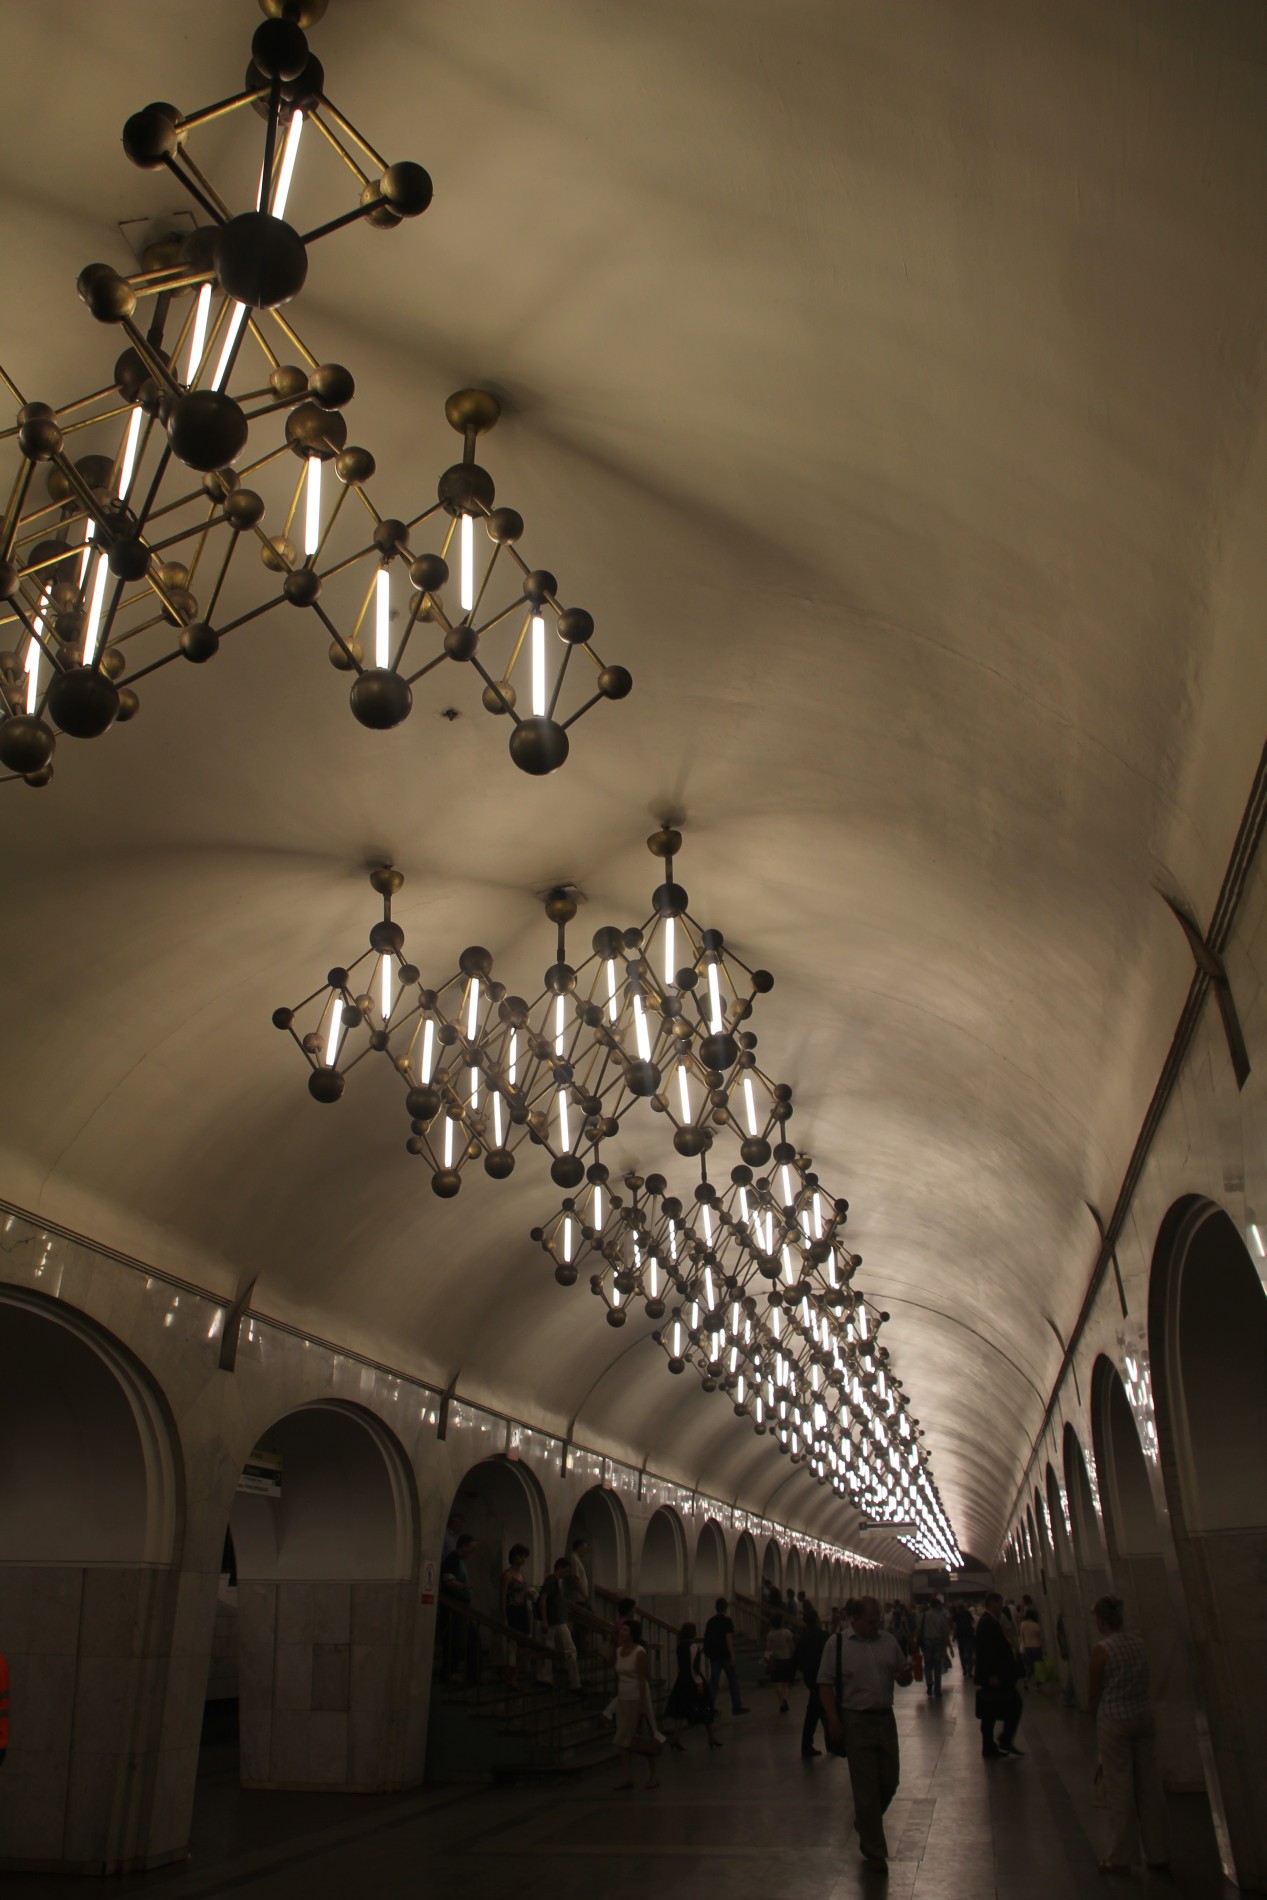 Unique chandeliers in the Moscow Metro's Mendeleevskaya Station were designed to look like representations of atomic bonds.